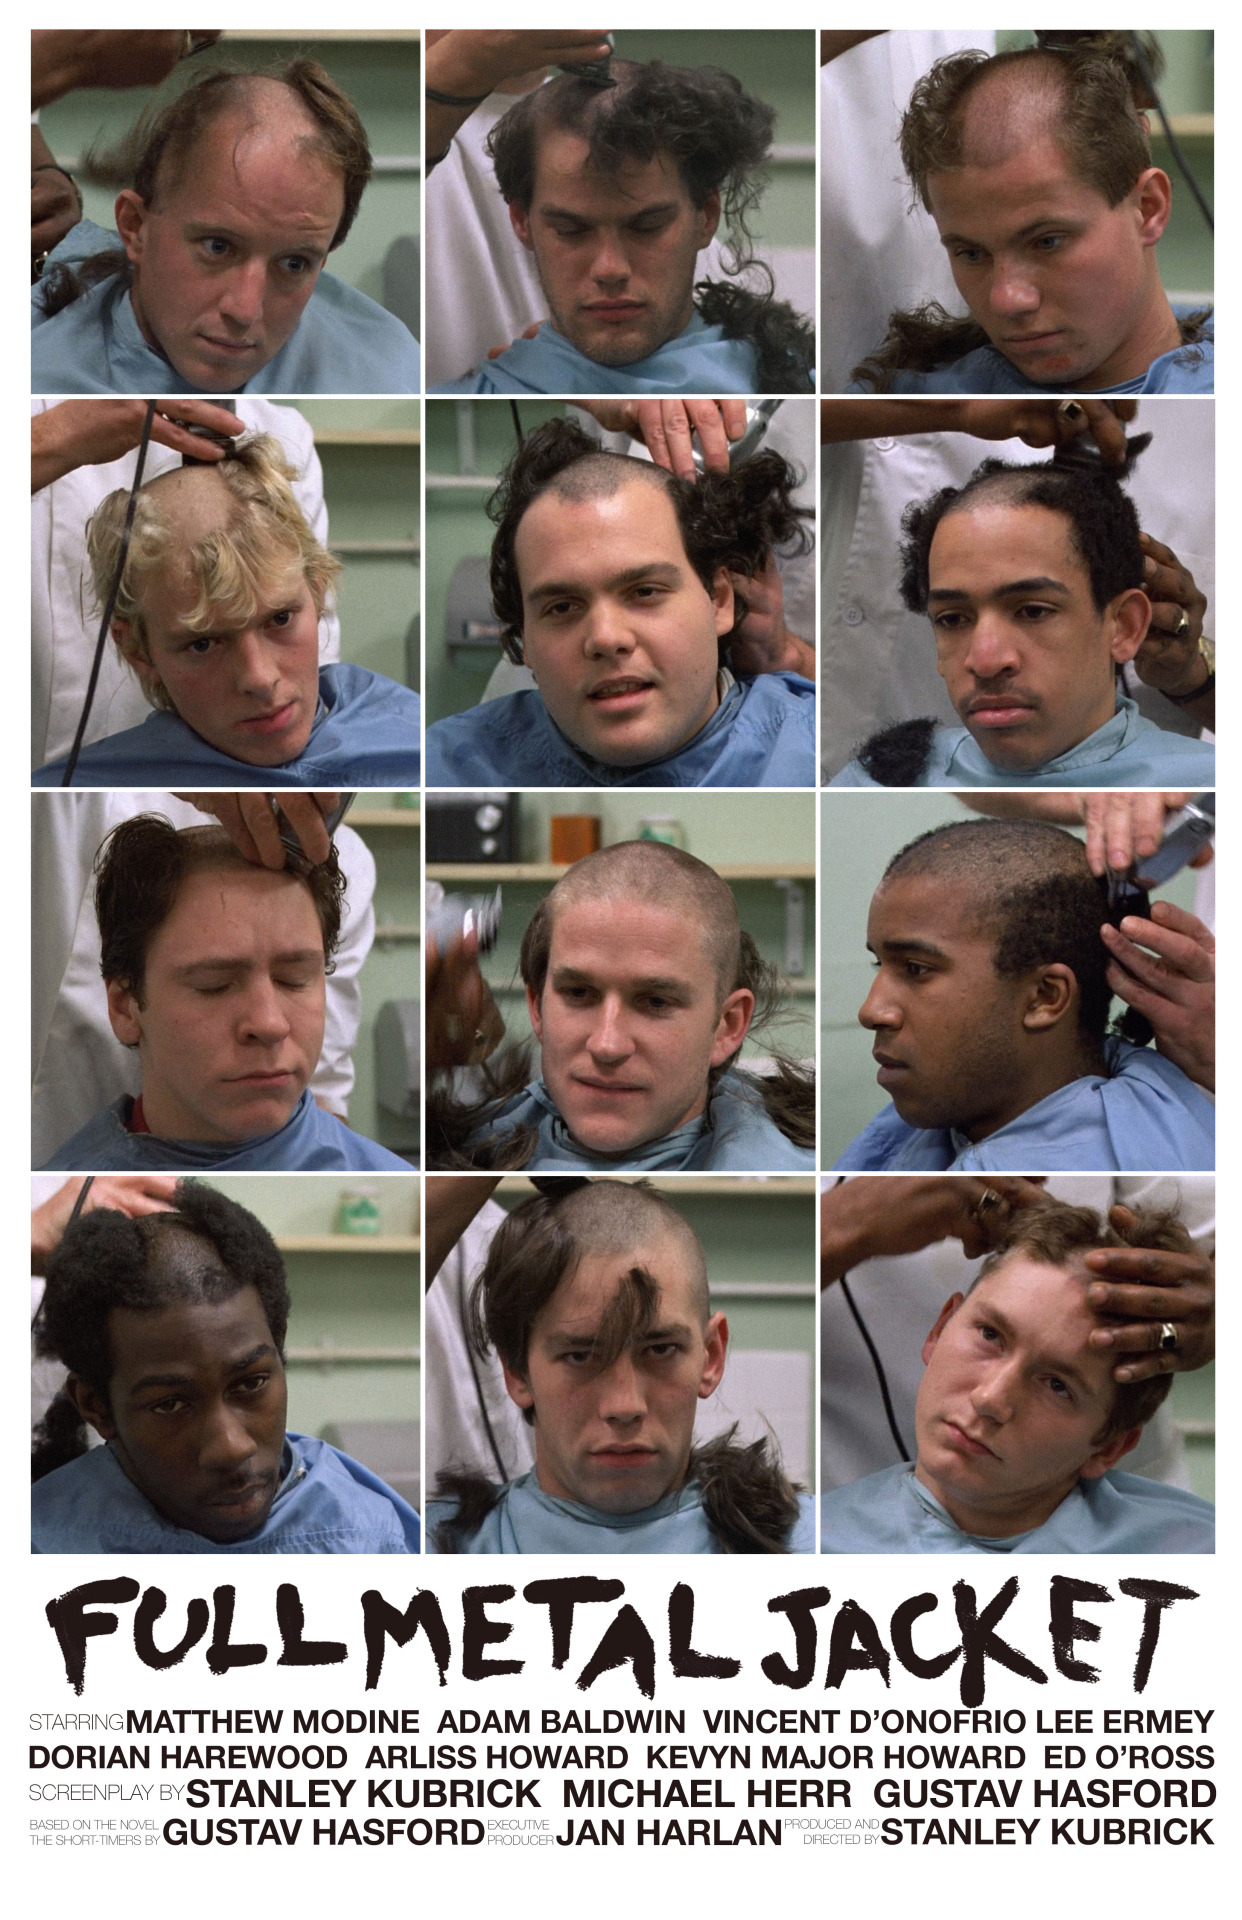 “Full Metal Jacket” poster showing all the main characters getting their boot camp buzz cut